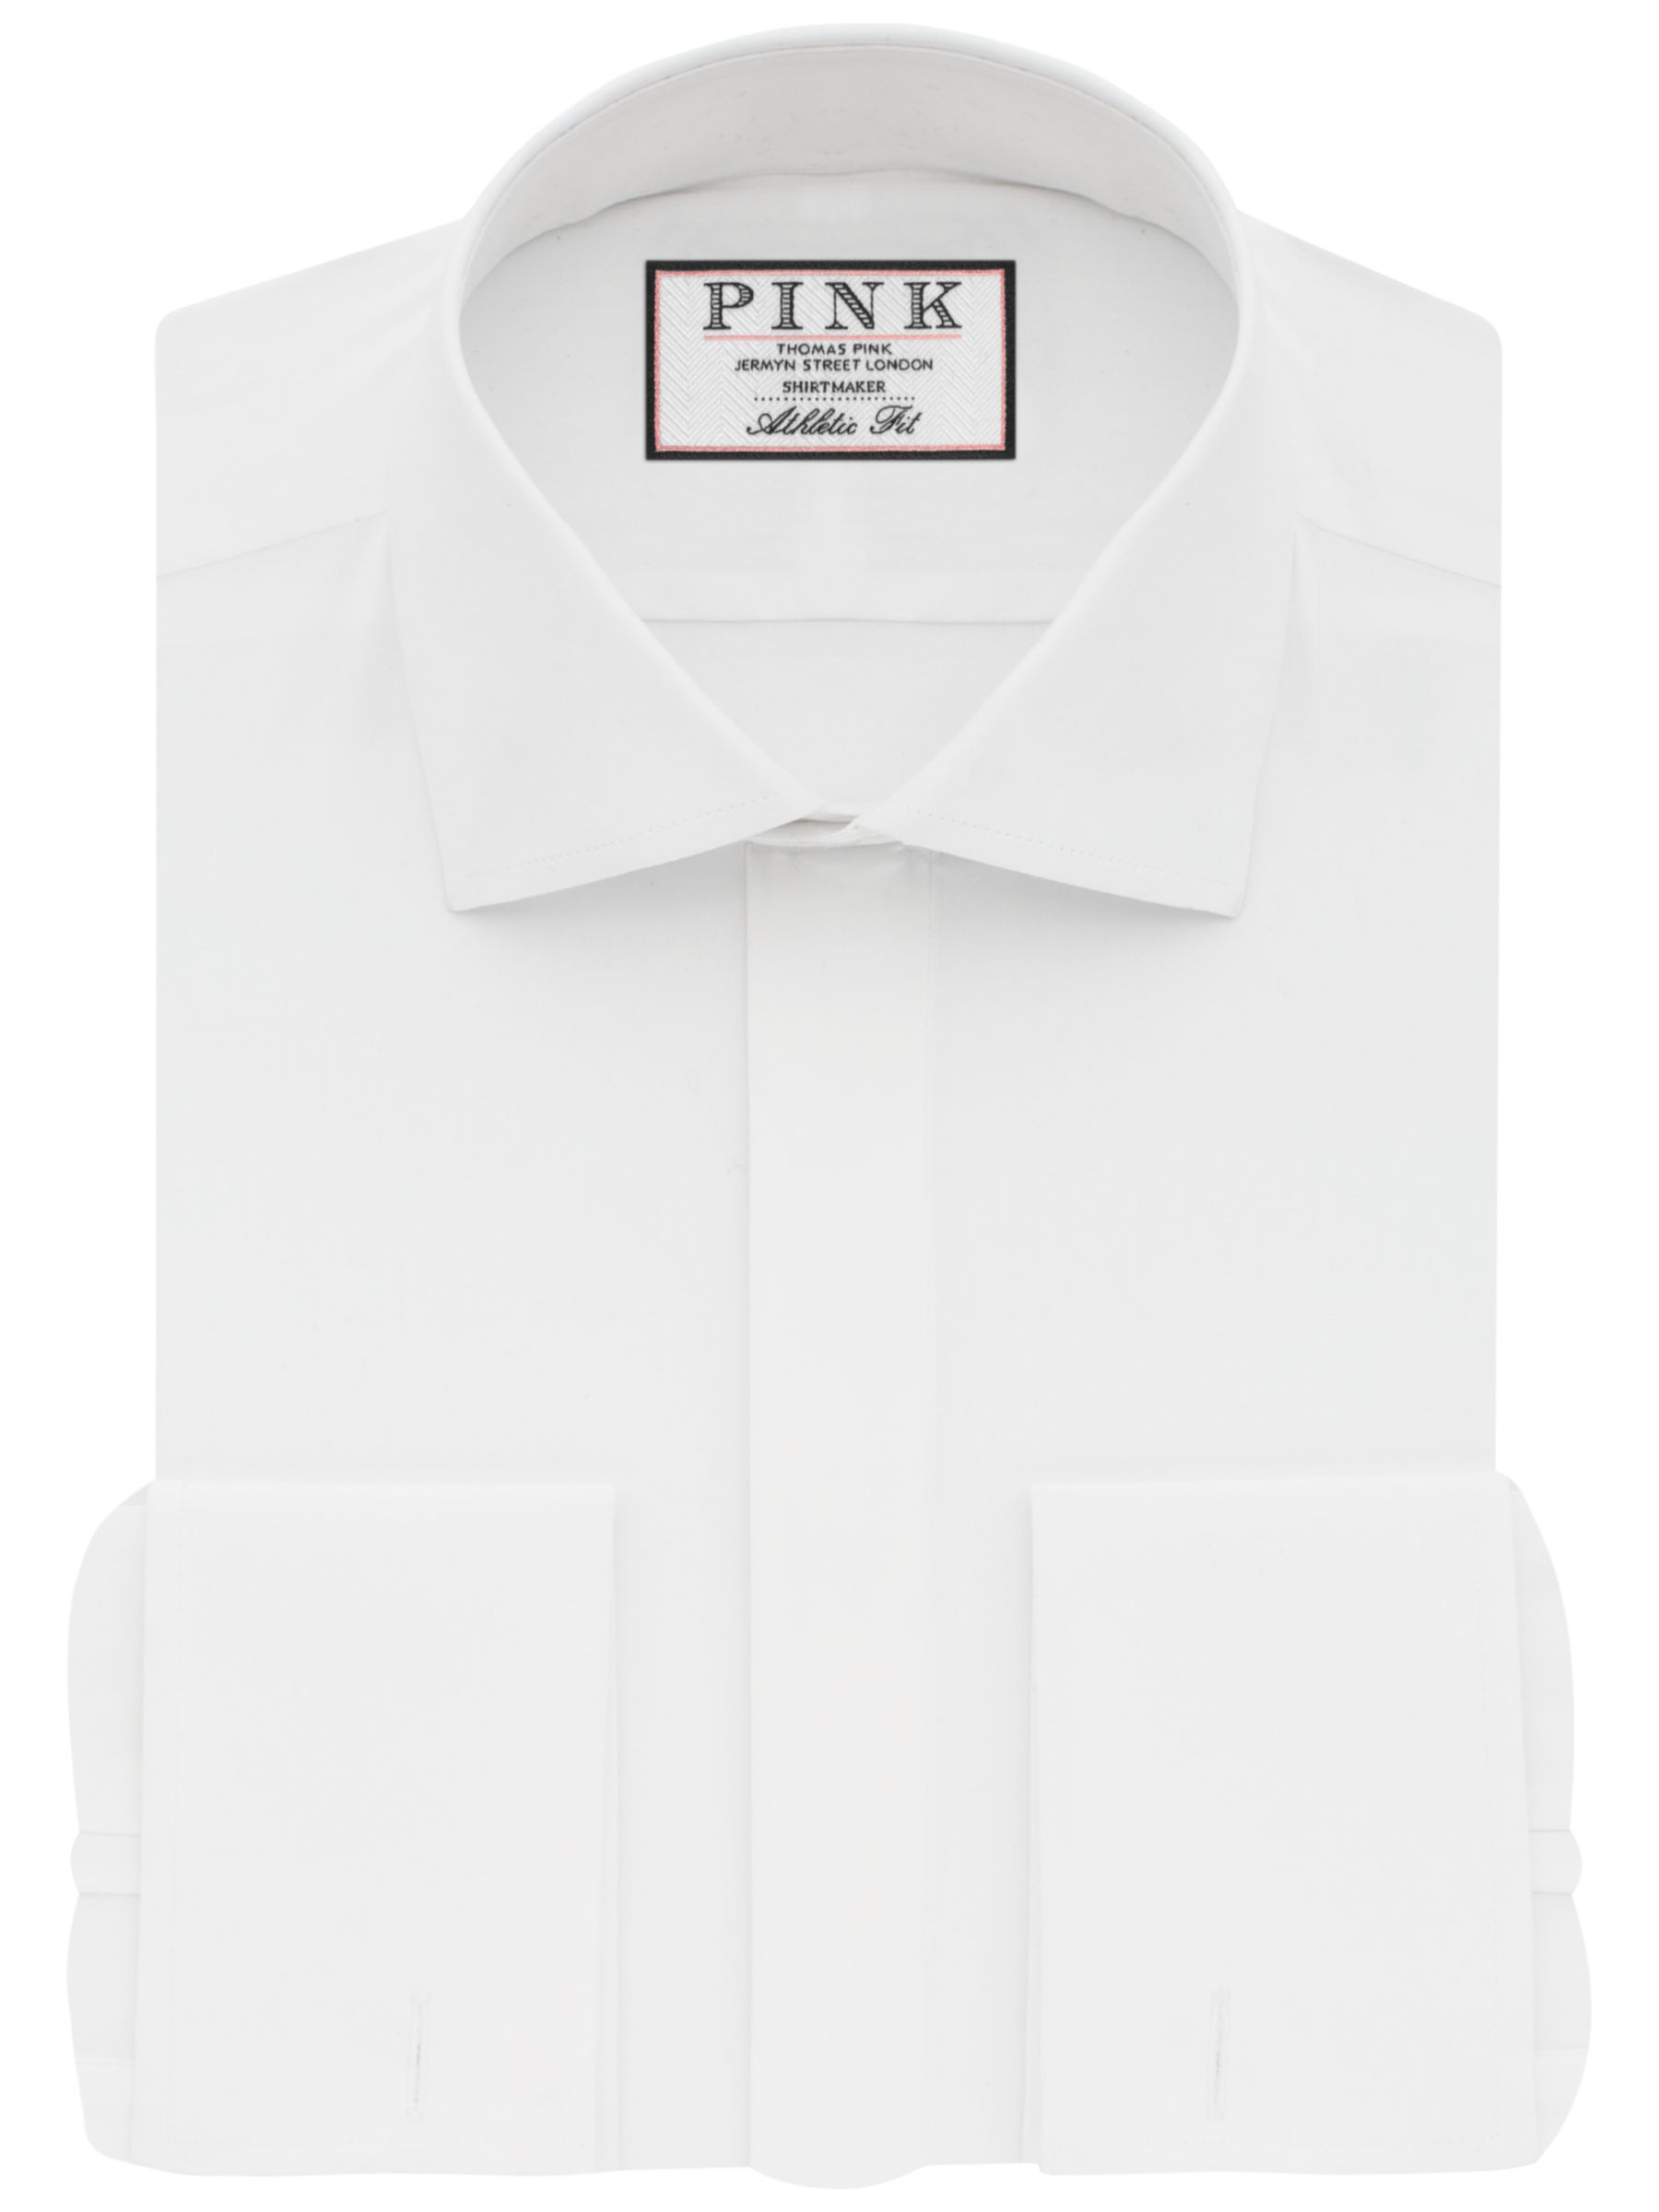 Thomas Pink Placket Athletic Fit Double Cuff Dress Shirt, White